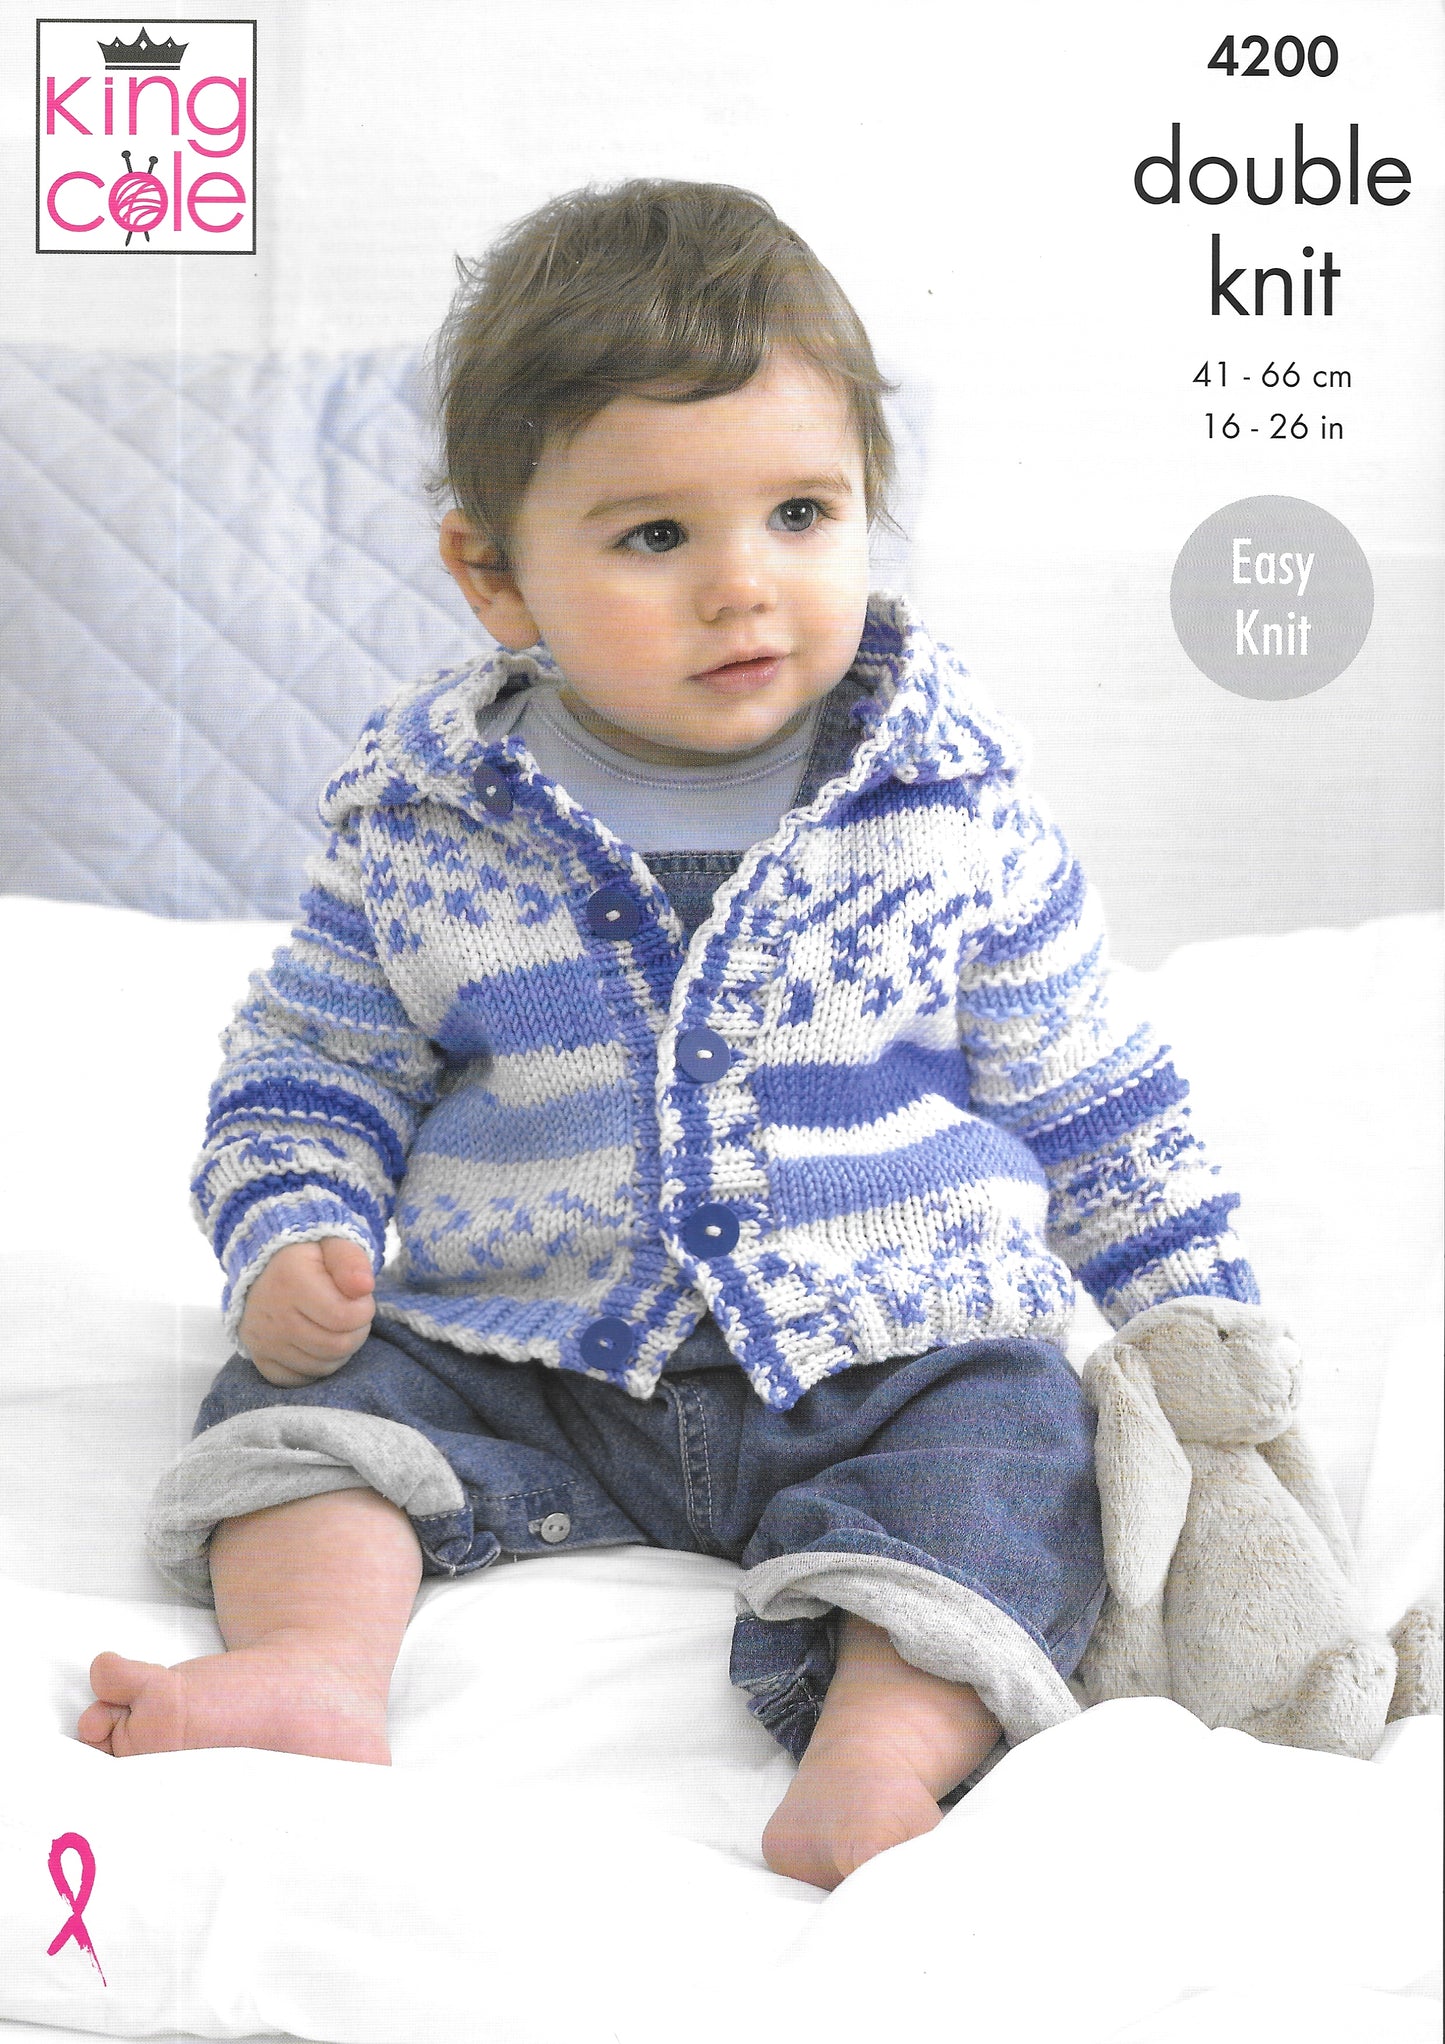 4200 King Cole Knitting Pattern. Baby Cardigans. Double Knit